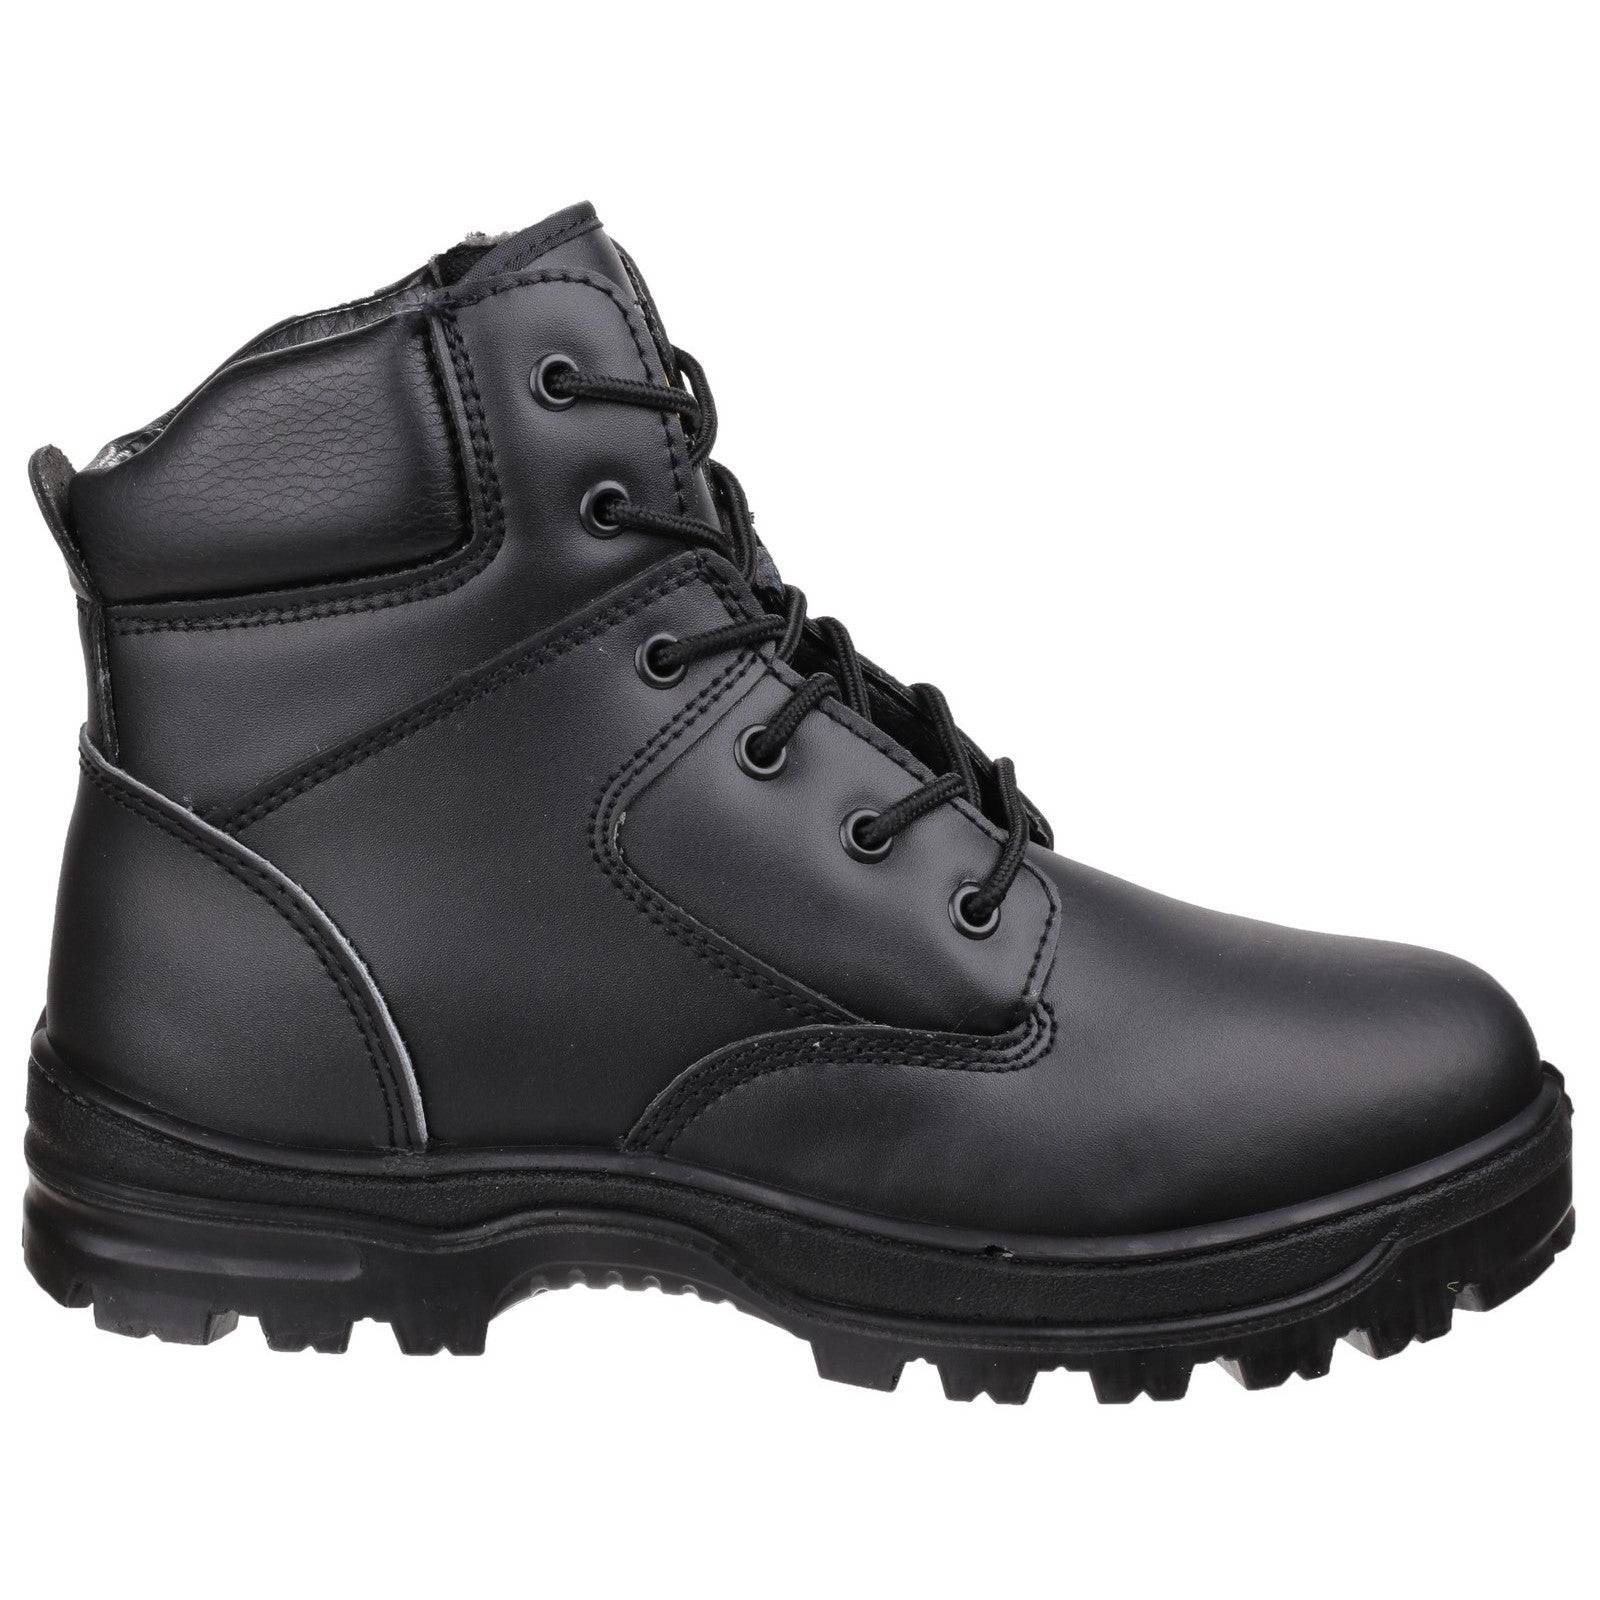 Amblers FS84 Antistatic Lace up Safety Boot